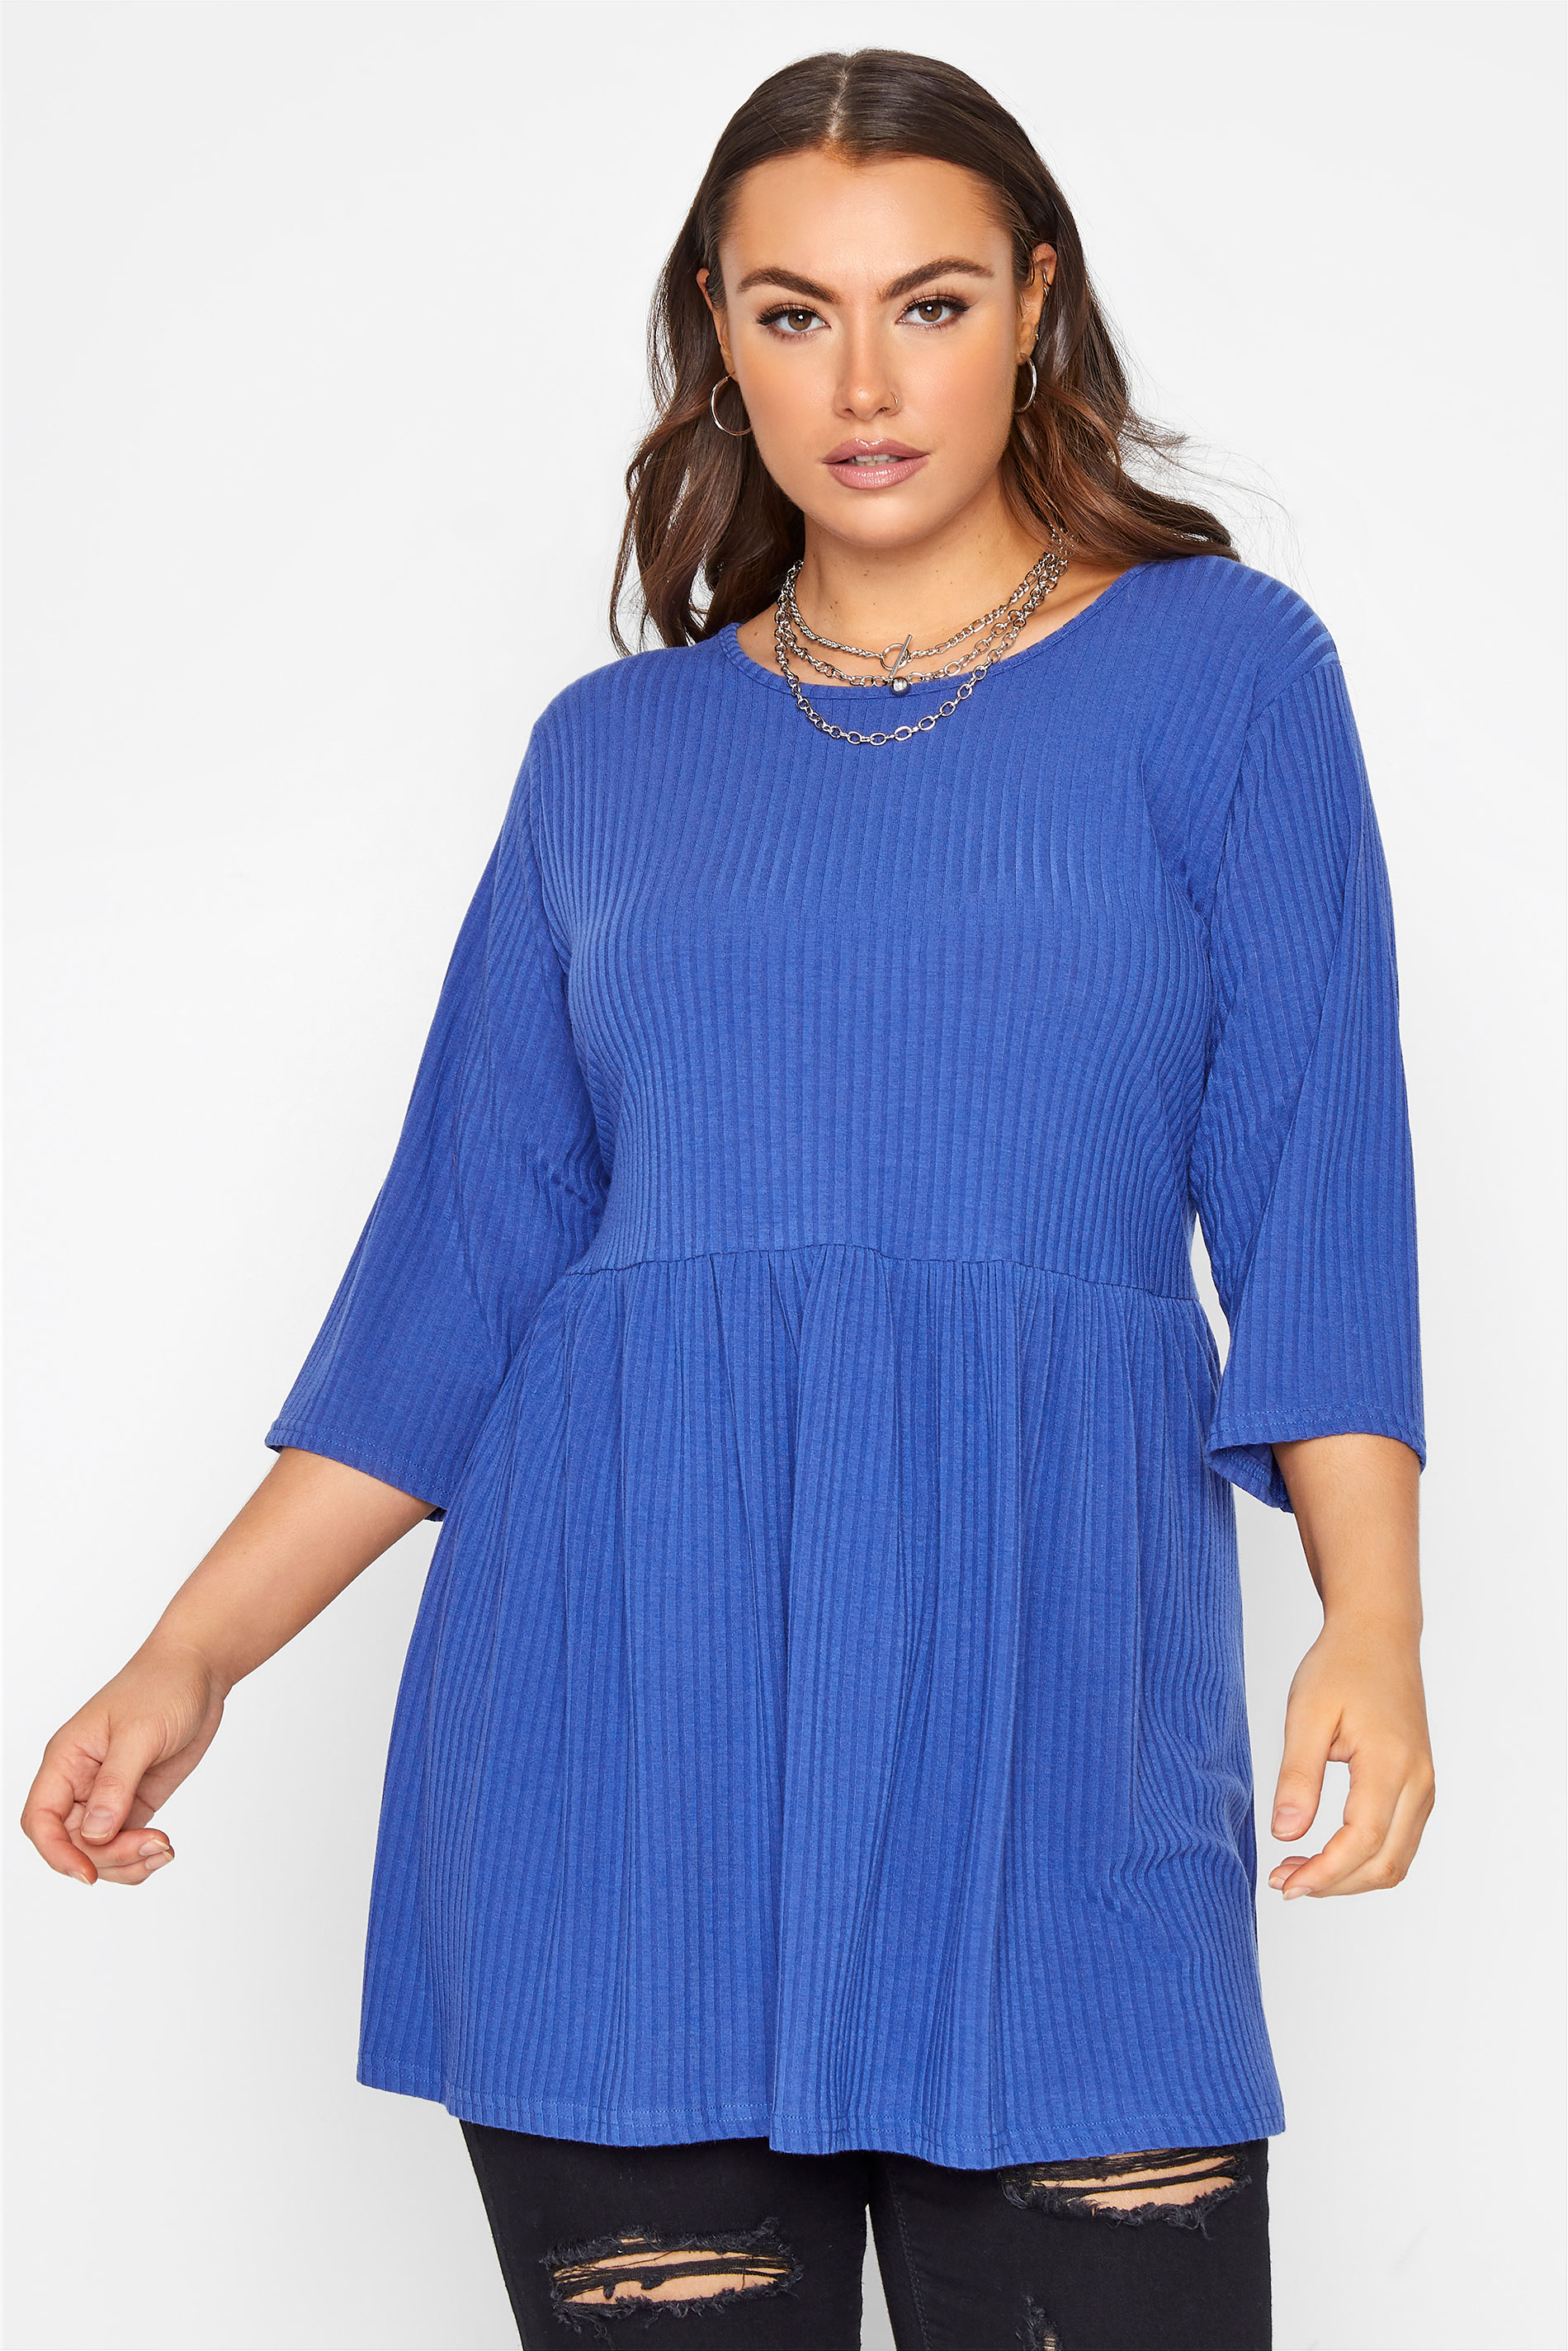 LIMITED COLLECTION Cobalt Blue Ribbed Smock Top_A.jpg